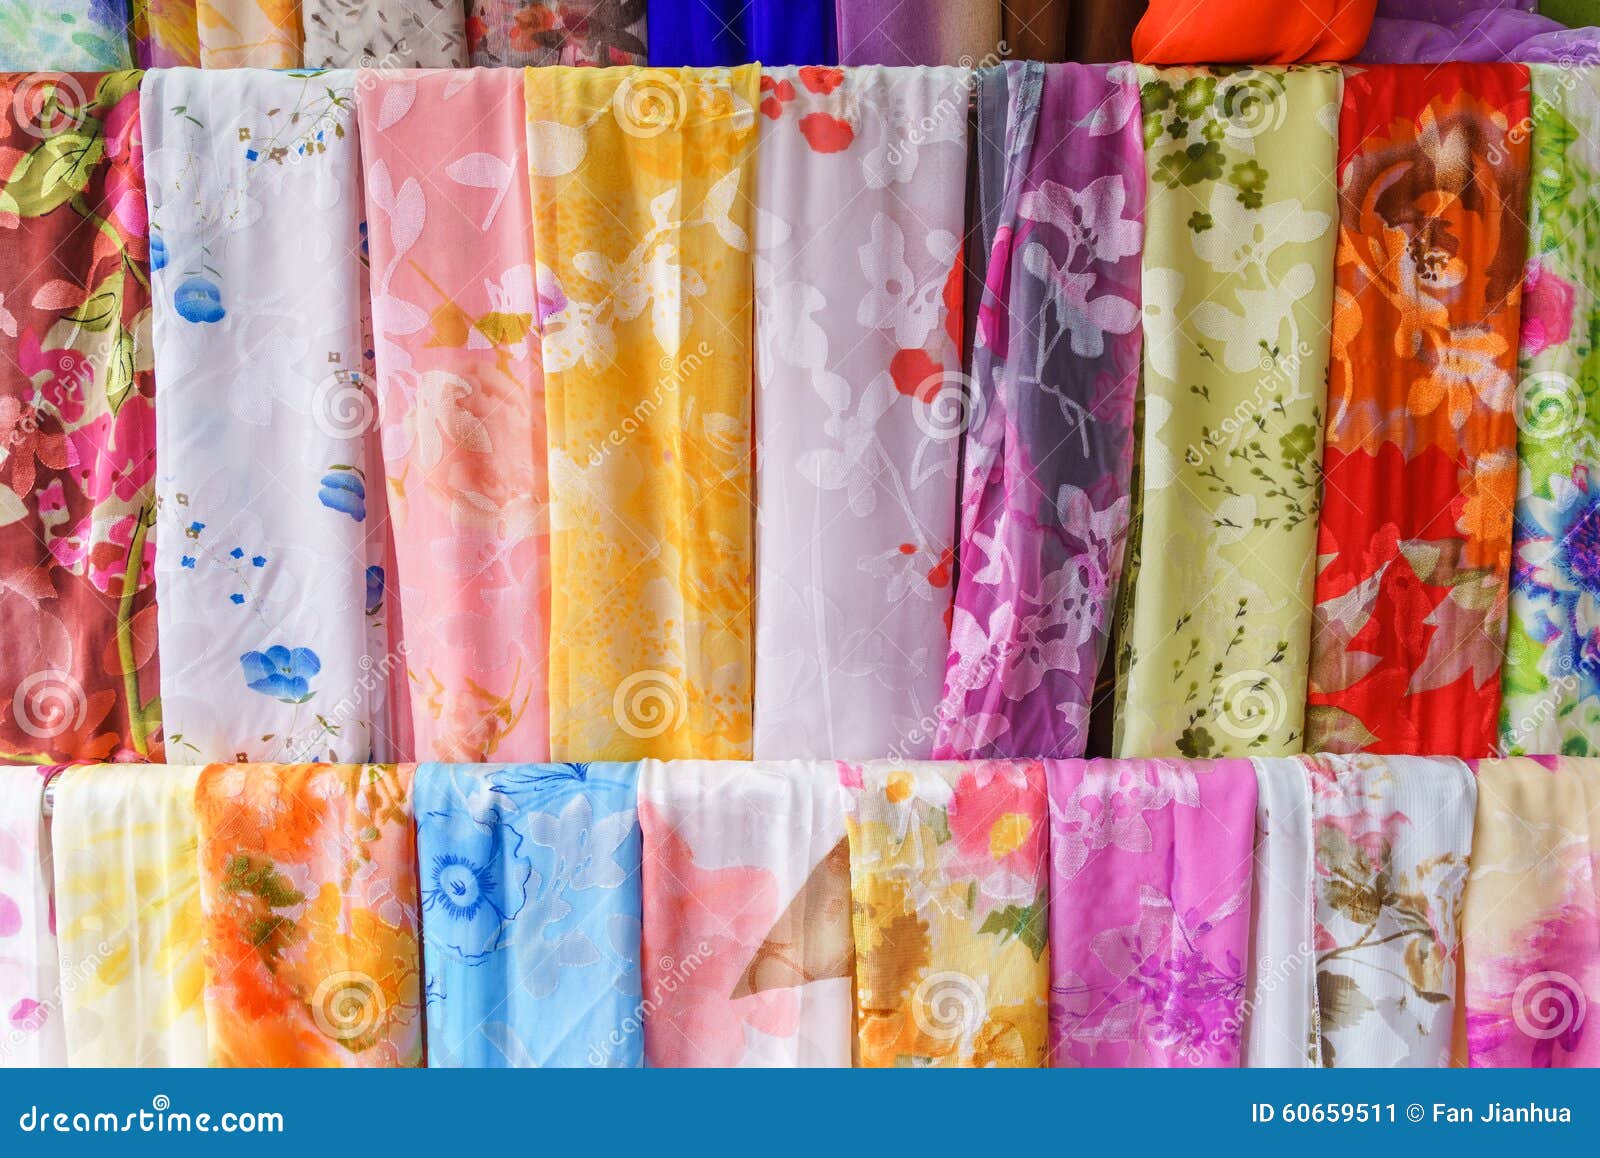 The Multi-colored Scarves Hanging on a Wooden Hanger. Stock Image ...